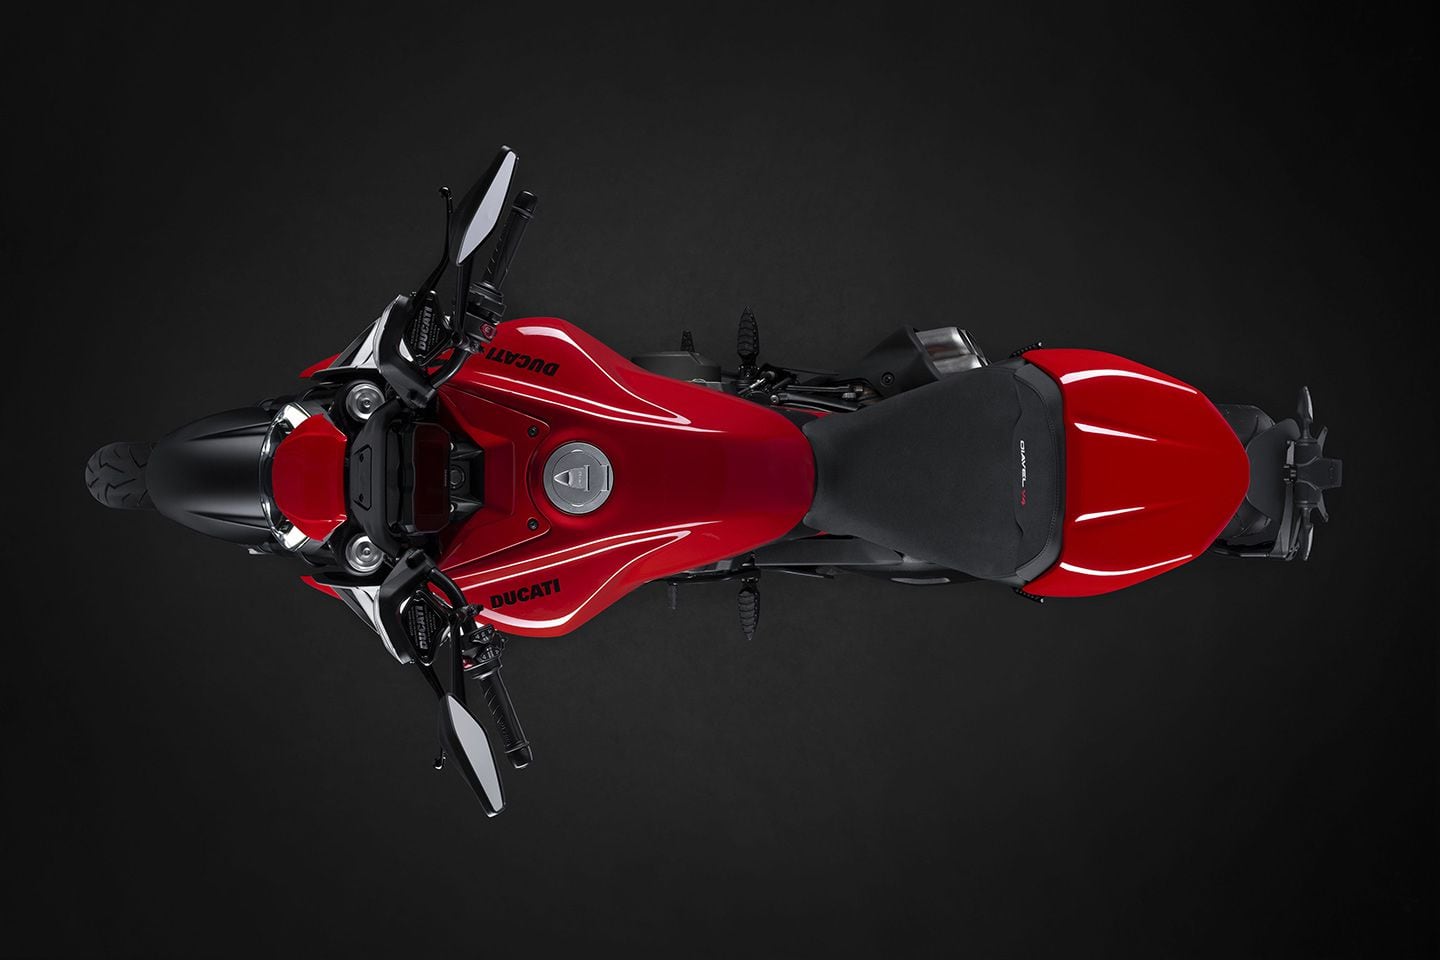 The so-called “sinuous top view,” one of the distinctive shapes that give Ducatis “a strong family resemblance” to their predecessors.